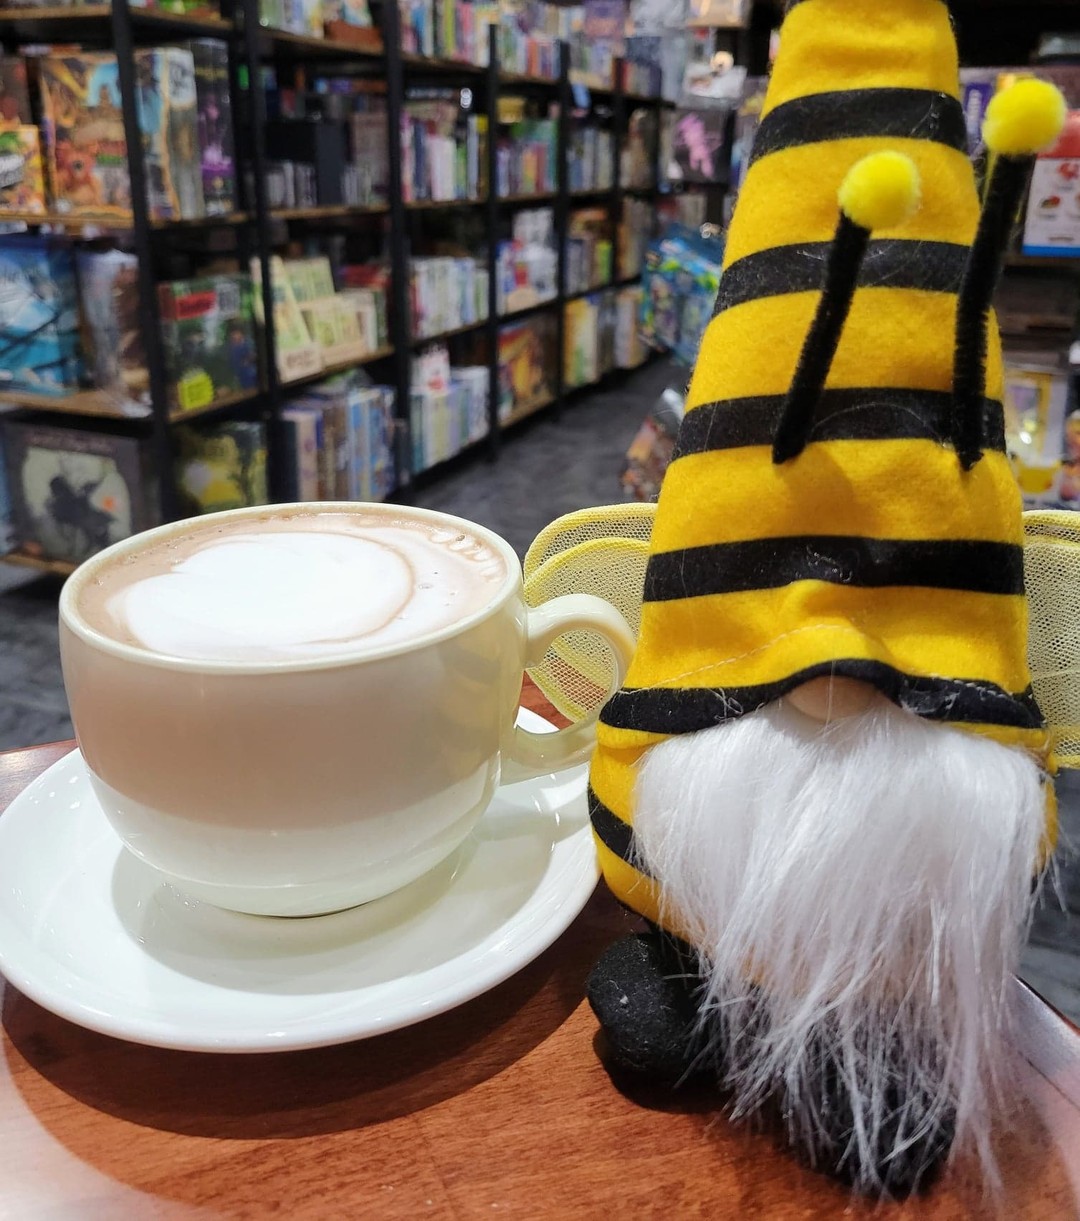 Even though it's not winter, we at The Gnoshery believe that a good-old hot chocolate can be enjoyed year around. So stop in in and consider grabbing one with a flavor, like this almond hot chocolate; it tastes exactly like an almond joy!

#gnoshery #gnomegames #coffee #hotchocolate #latte #gnoshgnosh